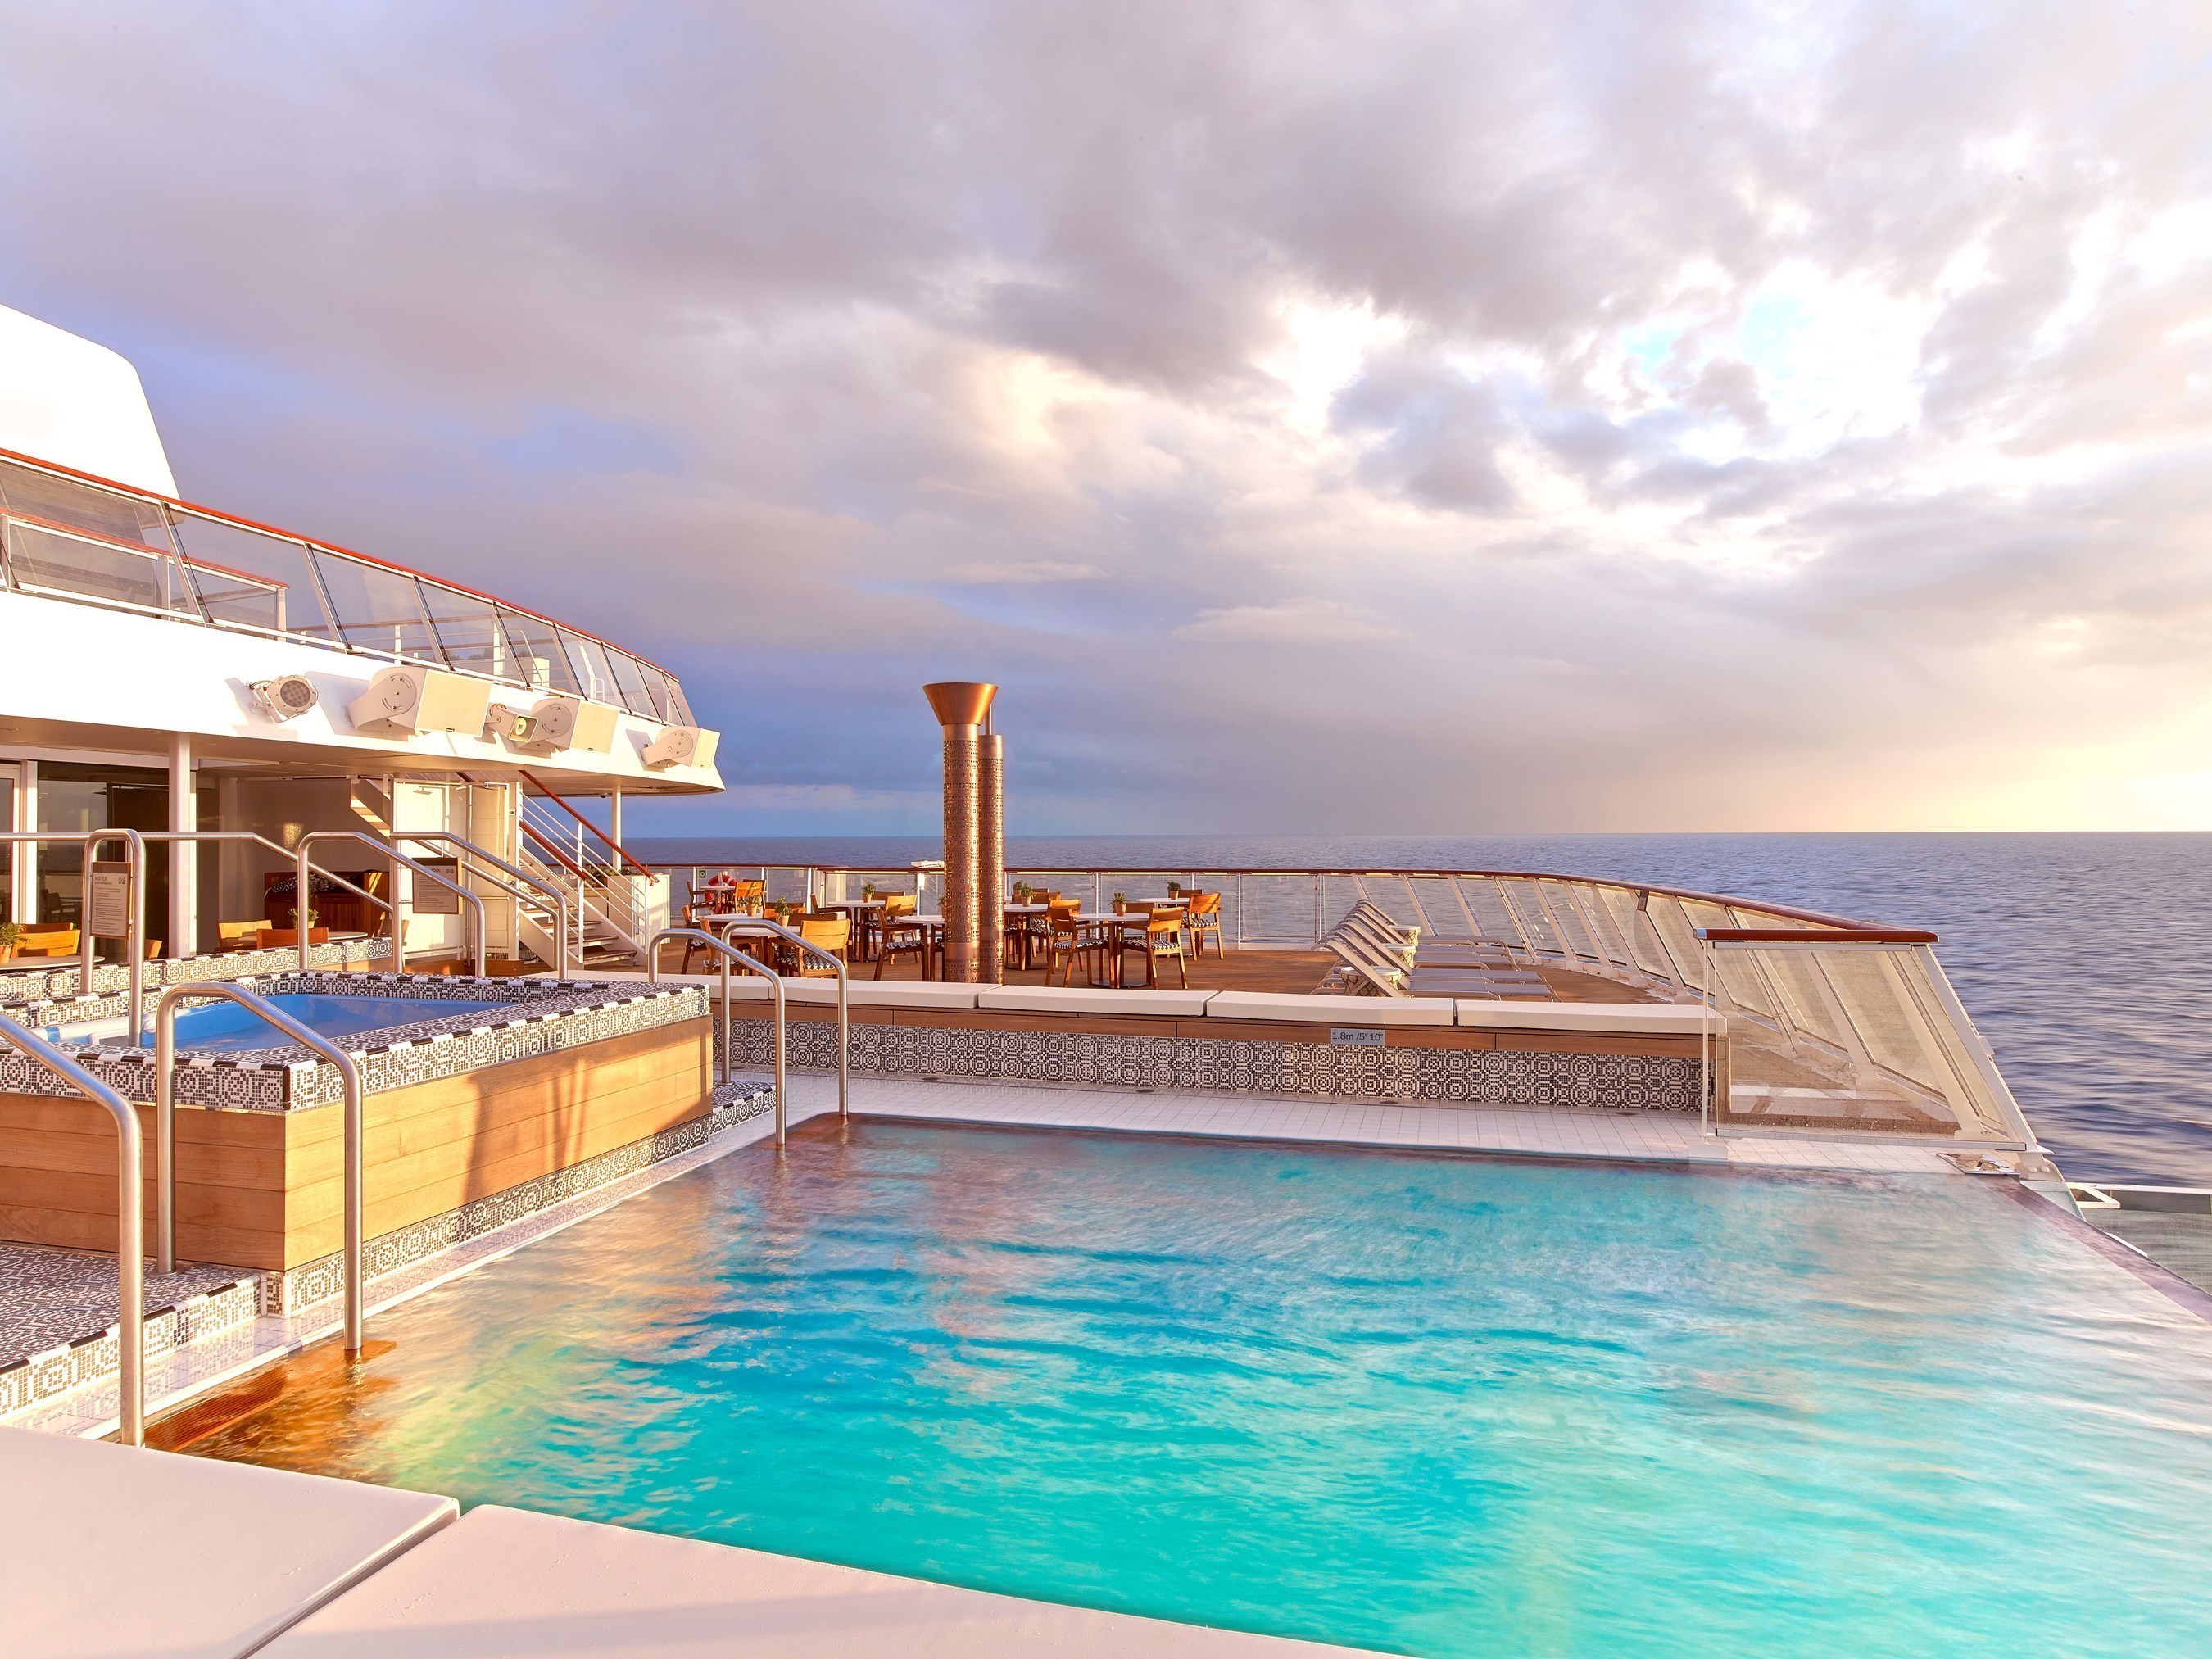 Throughout Viking Star, the first new ship from Viking Ocean Cruises, details were incorporated to pay homage to the company's Nordic heritage and to help guests immerse themselves in local surroundings. A glass-backed infinity pool, which is the only infinity pool of its kind, is cantilevered off the stern and offers unobstructed views, allowing guests to relax in the sun and immerse themselves in the scenery of their surroundings. For more information, visit www.vikingoceancruises.com.